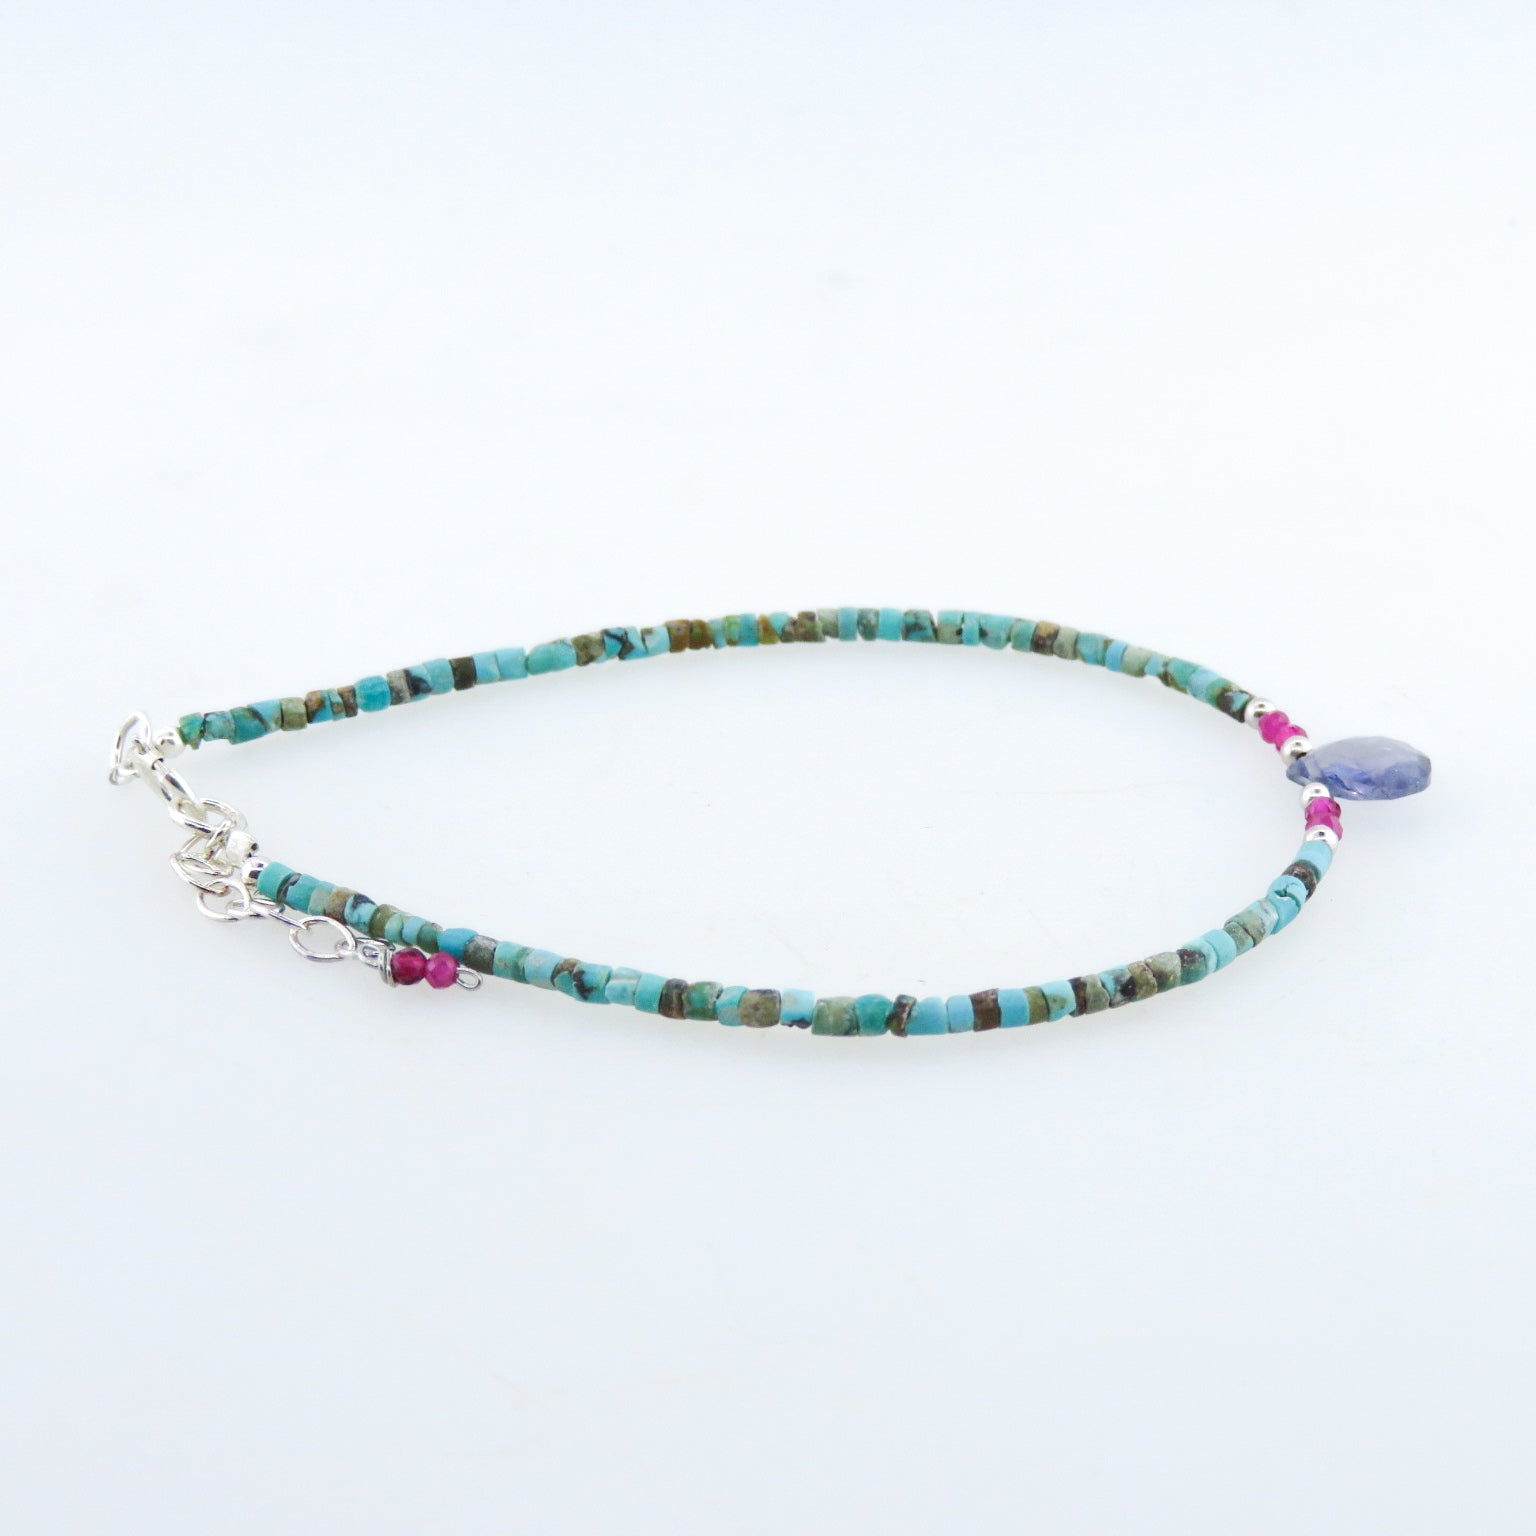 Turquoise Bracelet with Iolite, Garnet and Silver Beads